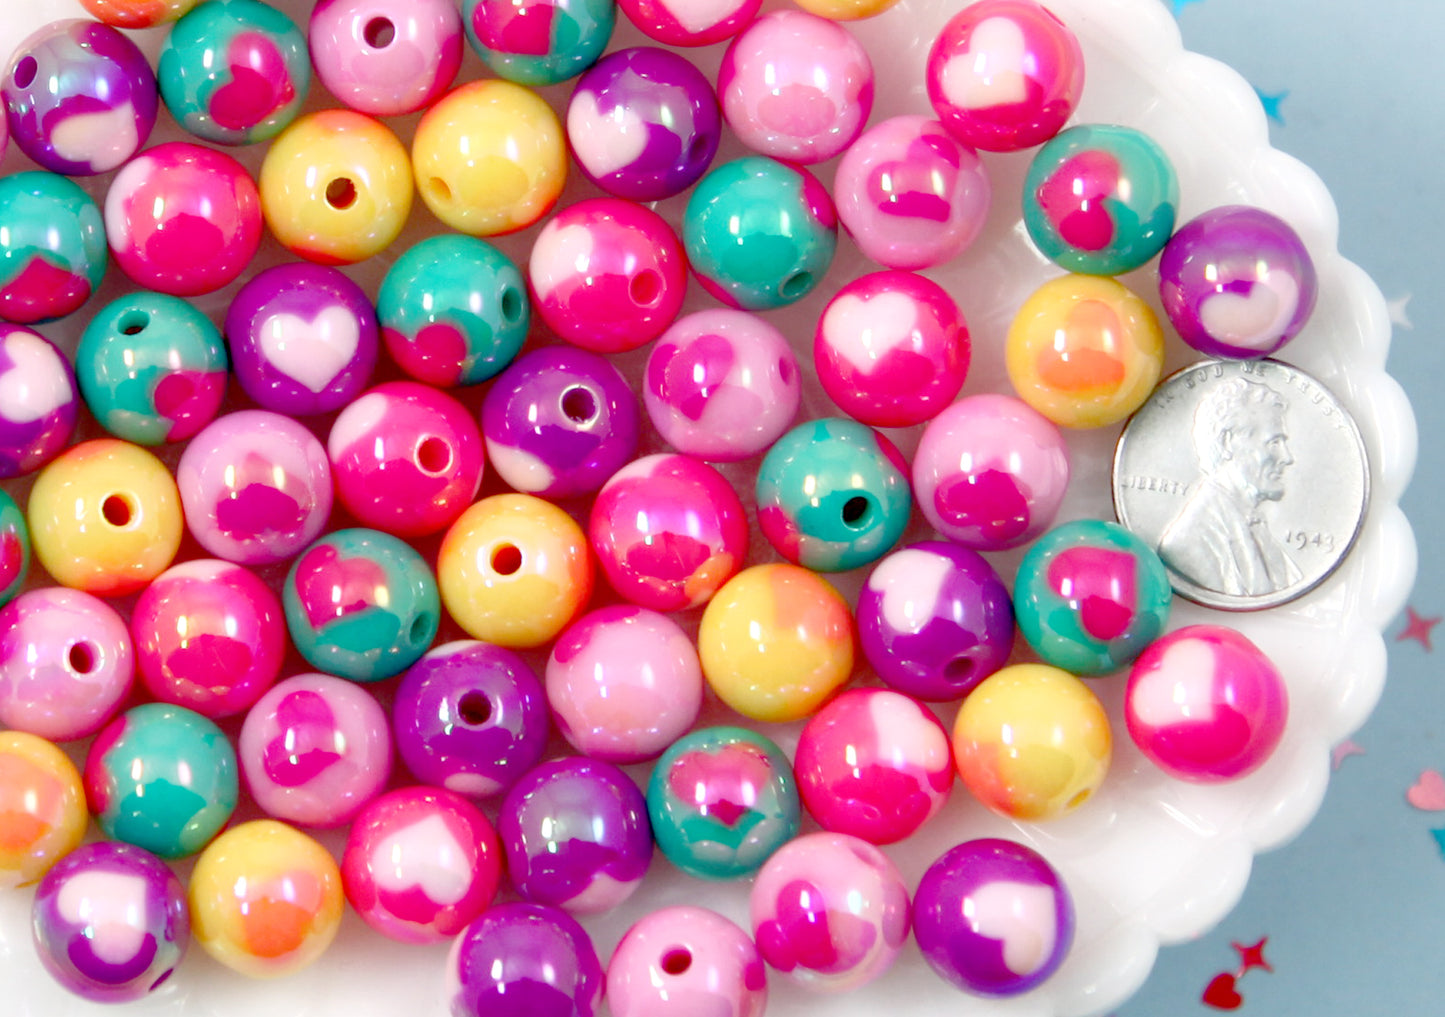 Heart Resin Beads - 12mm Small Inlaid Heart Pattern Gumball Bubblegum Resin or Acrylic Beads - 25 pcs set